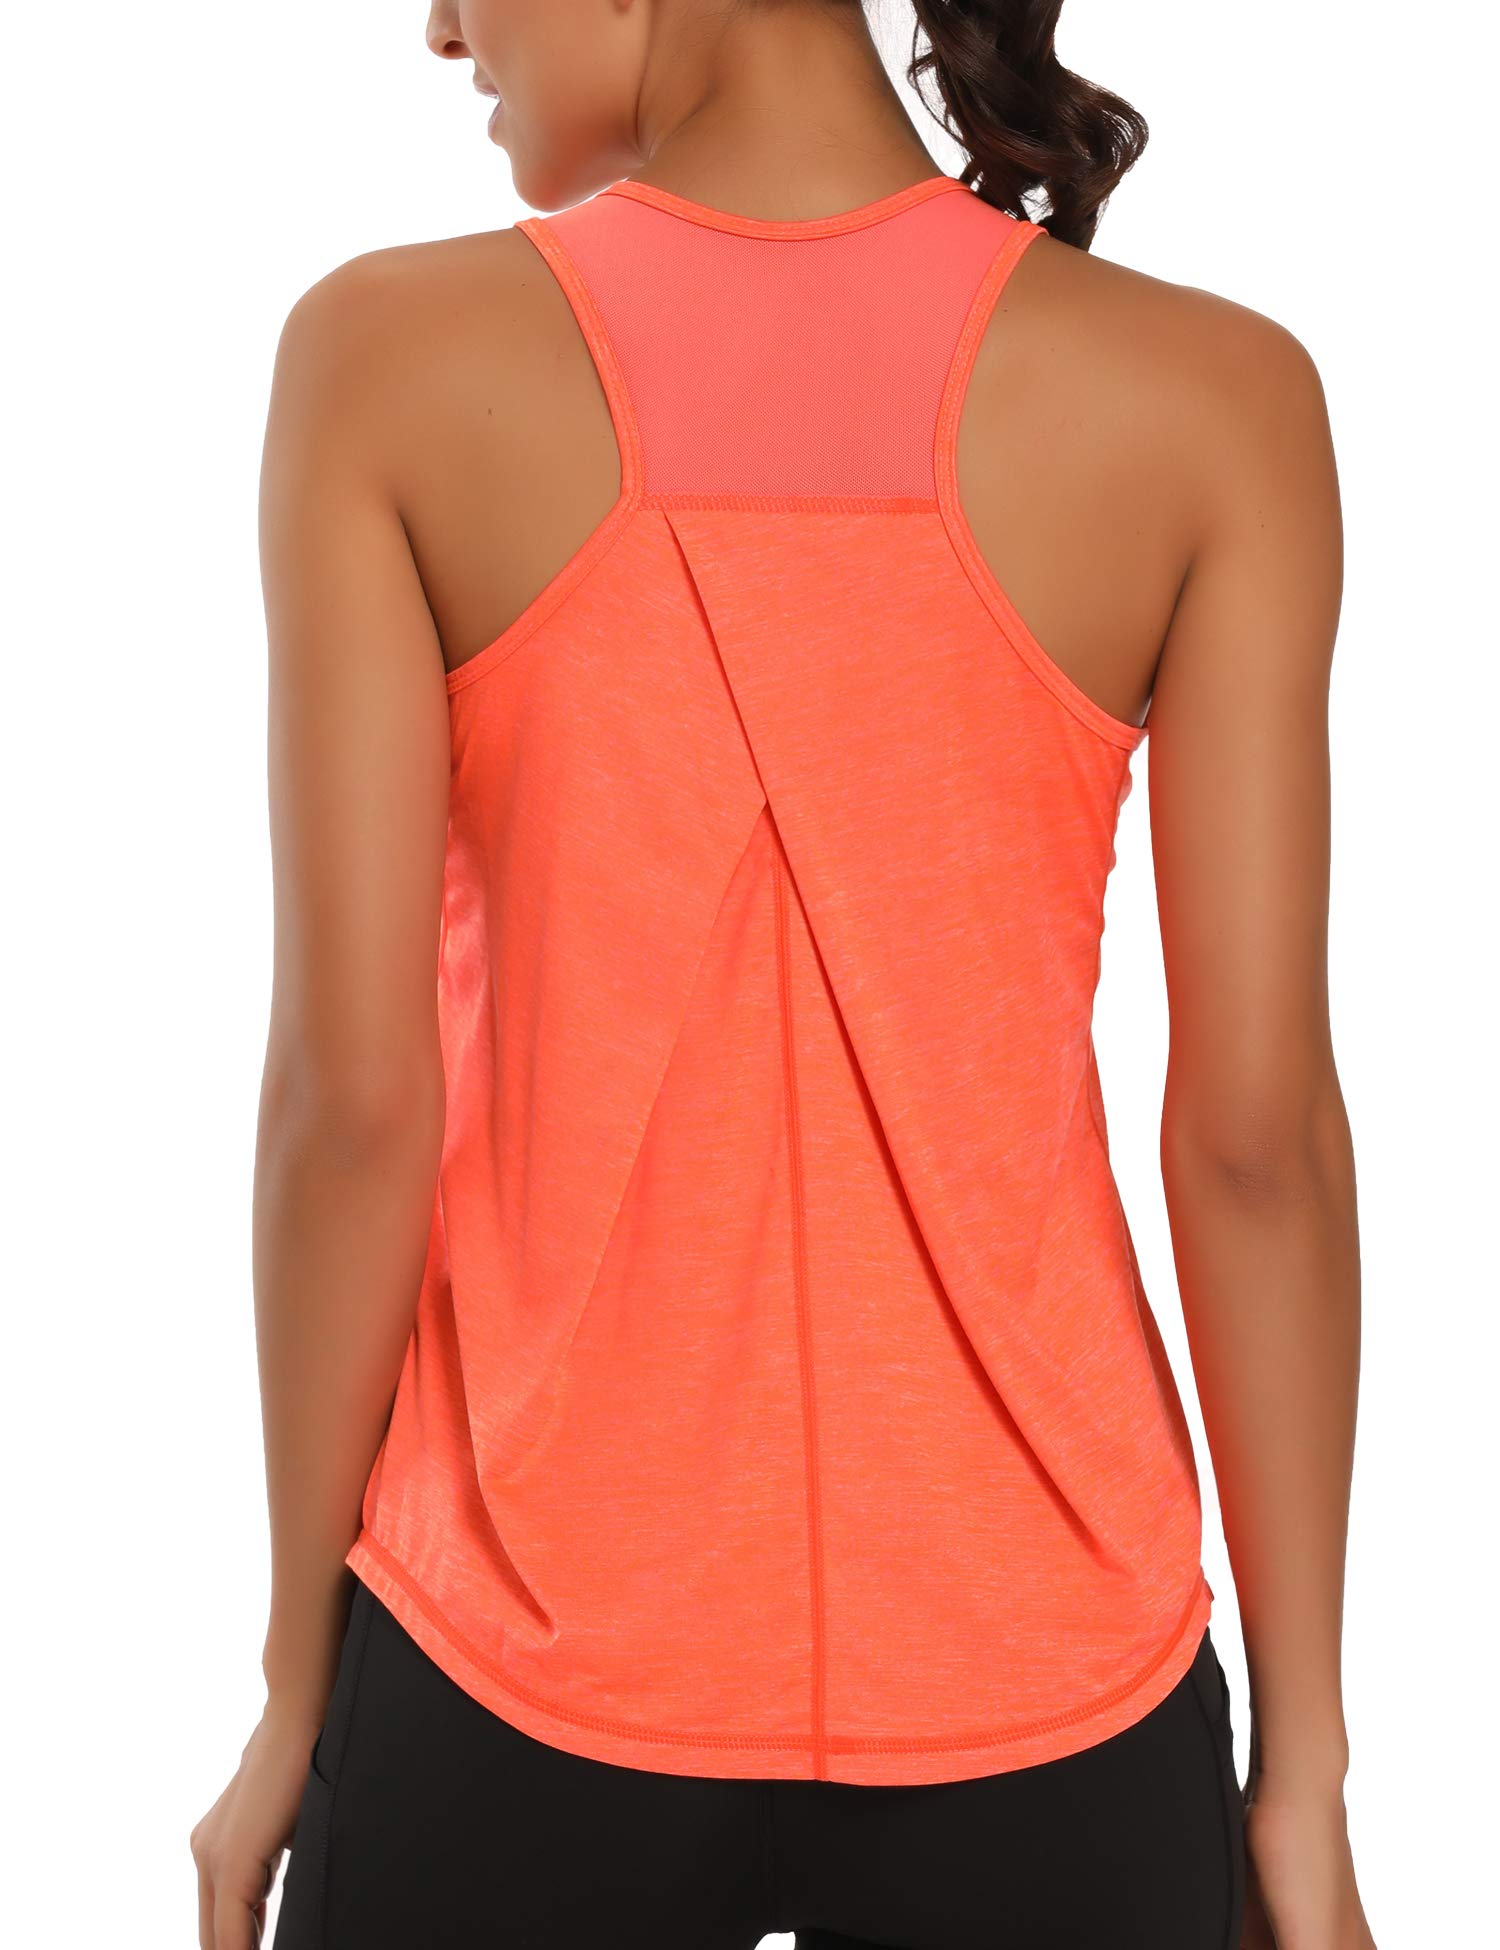 Racerback Tank Tops for Women Workout Tops Sleeveless Athletic